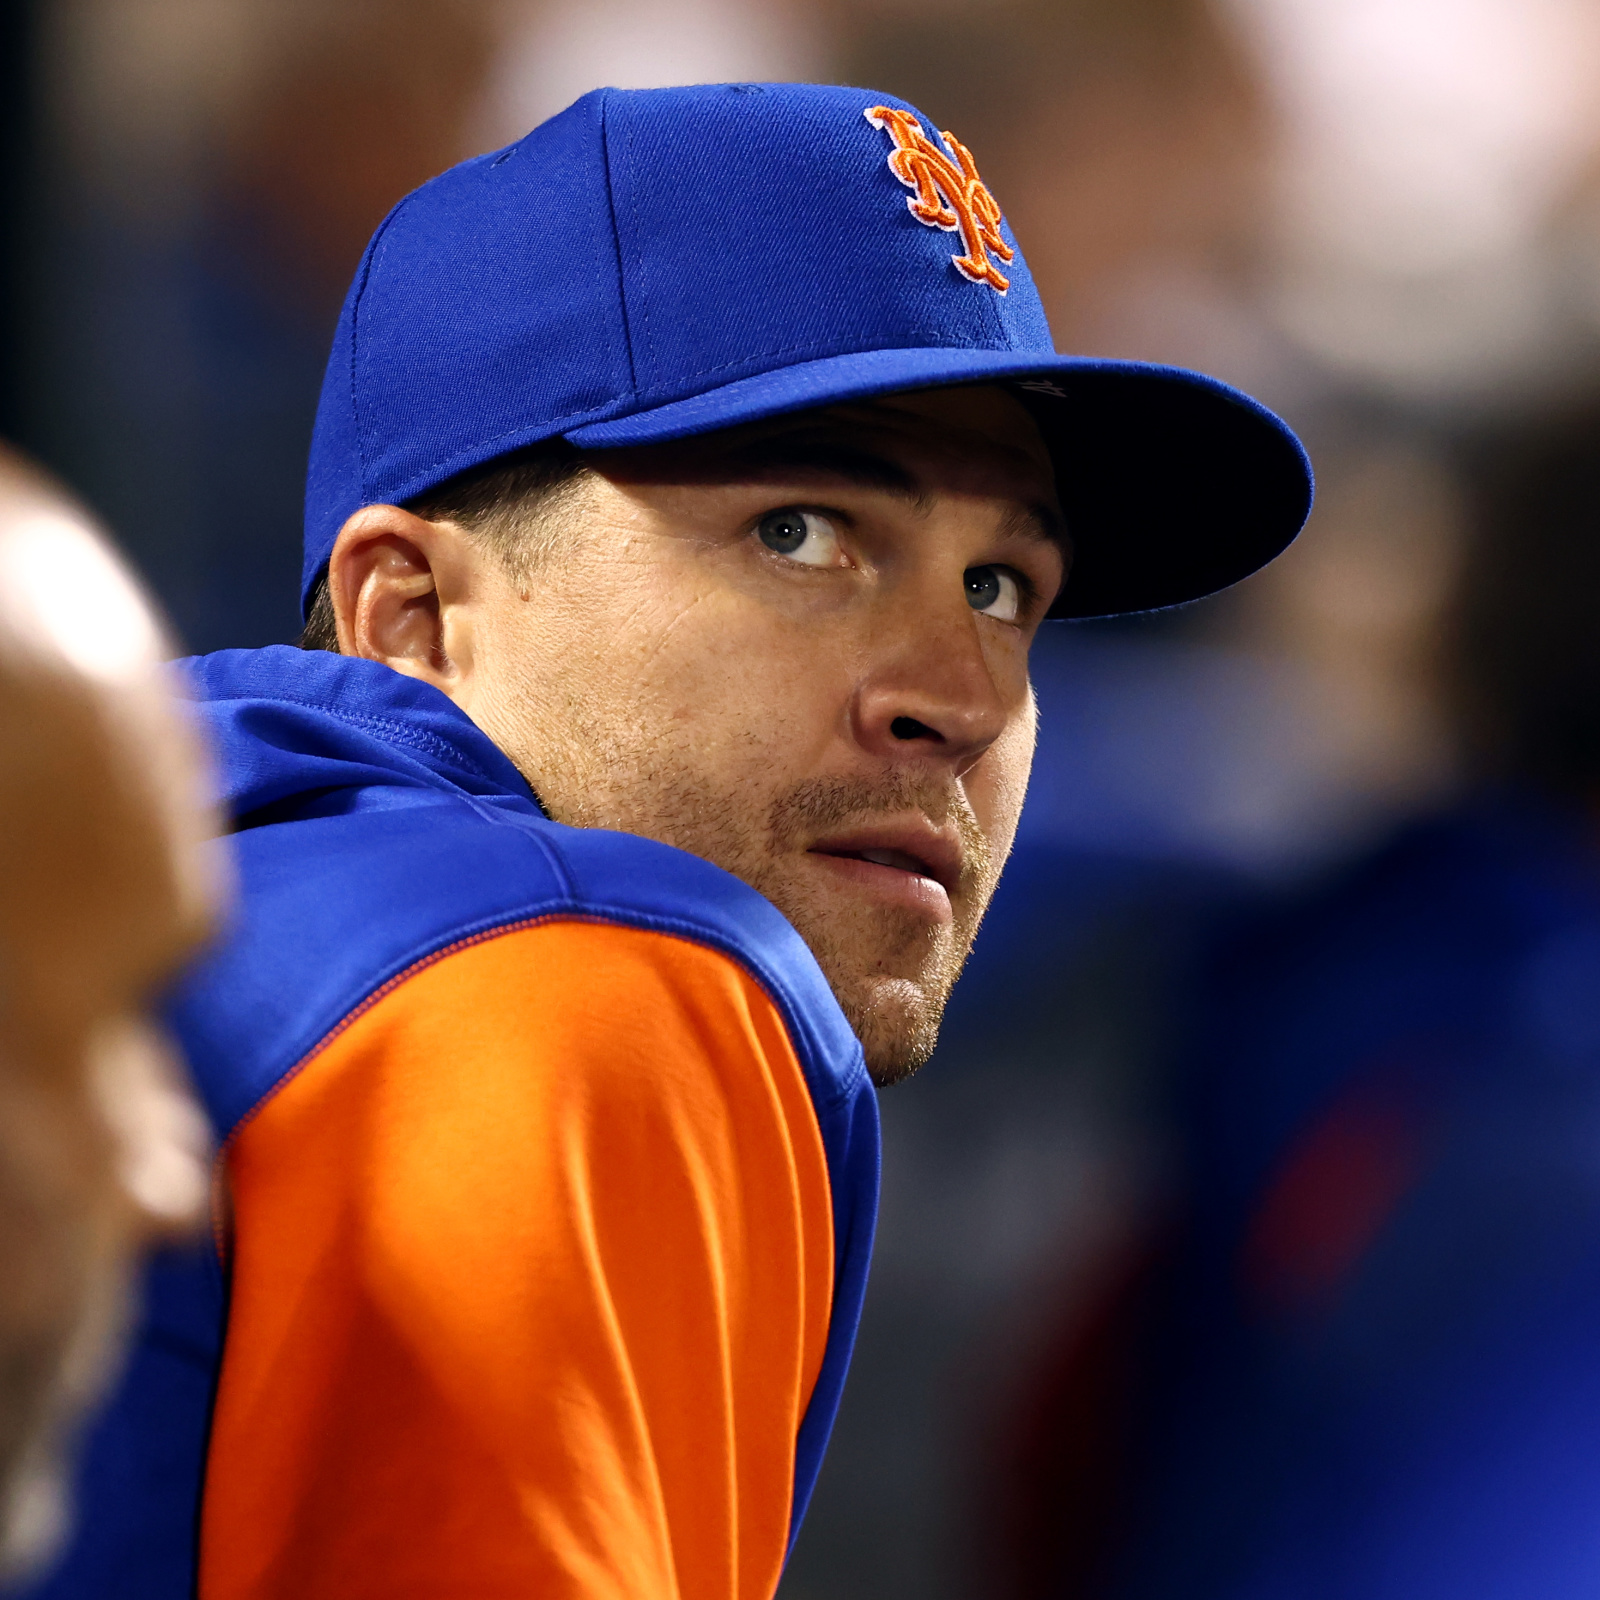 As expected, Jacob deGrom opts to become a free agent